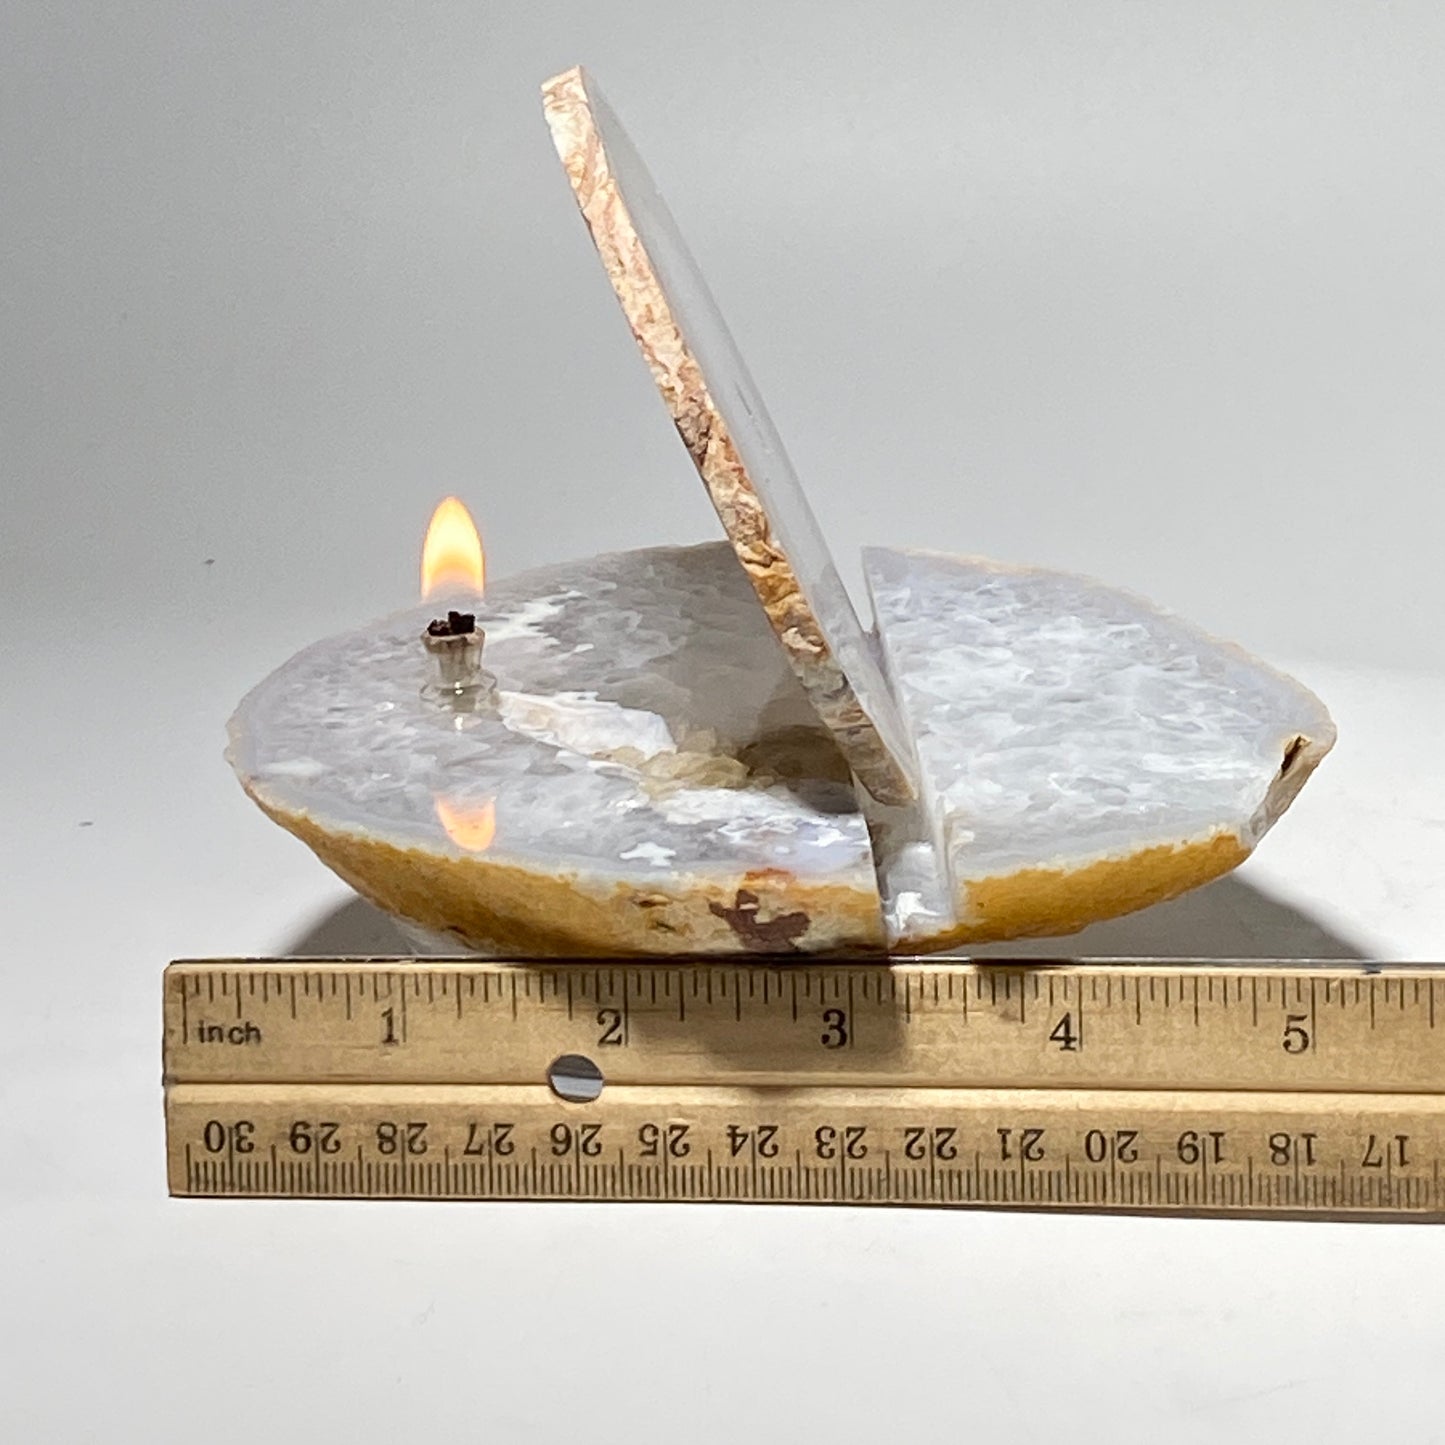 Rock oil candle with backlit agate slice